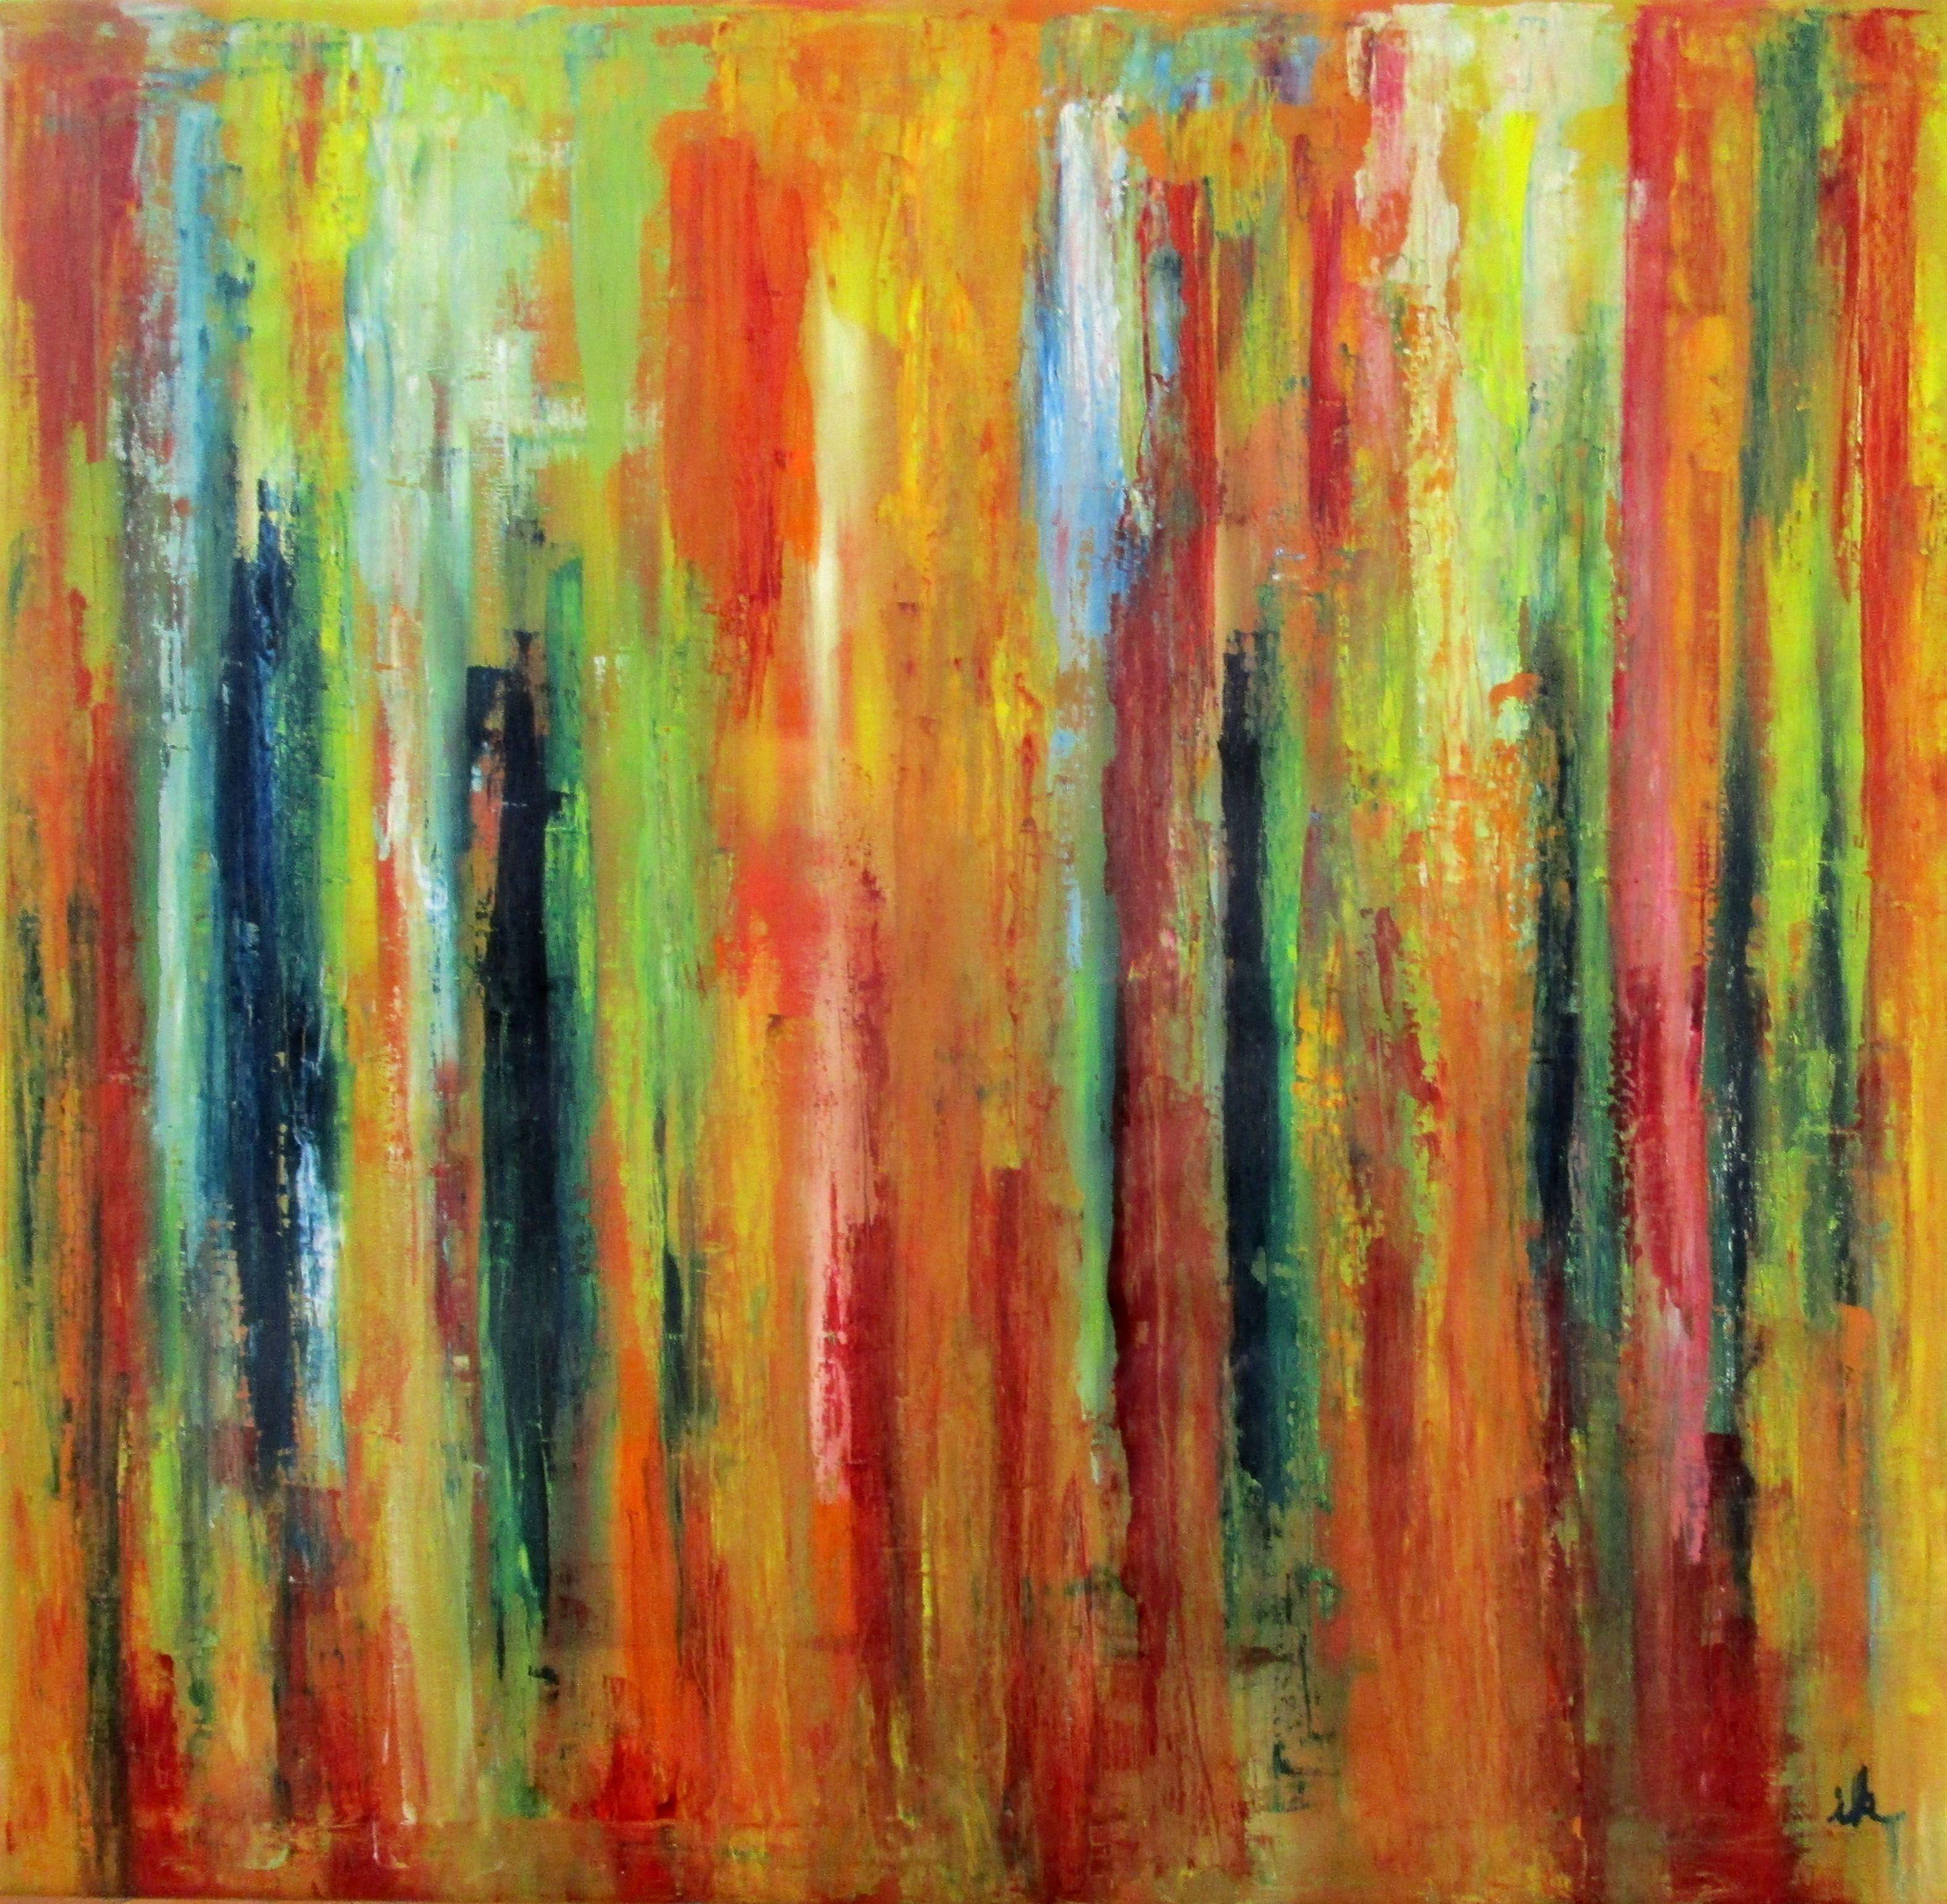 Late Summer in a Square, oil on canvas, 77 by 77 cm, stretched on a gallery frame edges painted;  technique brush and painting knife, 5 layers;  To free myself from the observation of facades, I continue with the work depicting tree trunks.